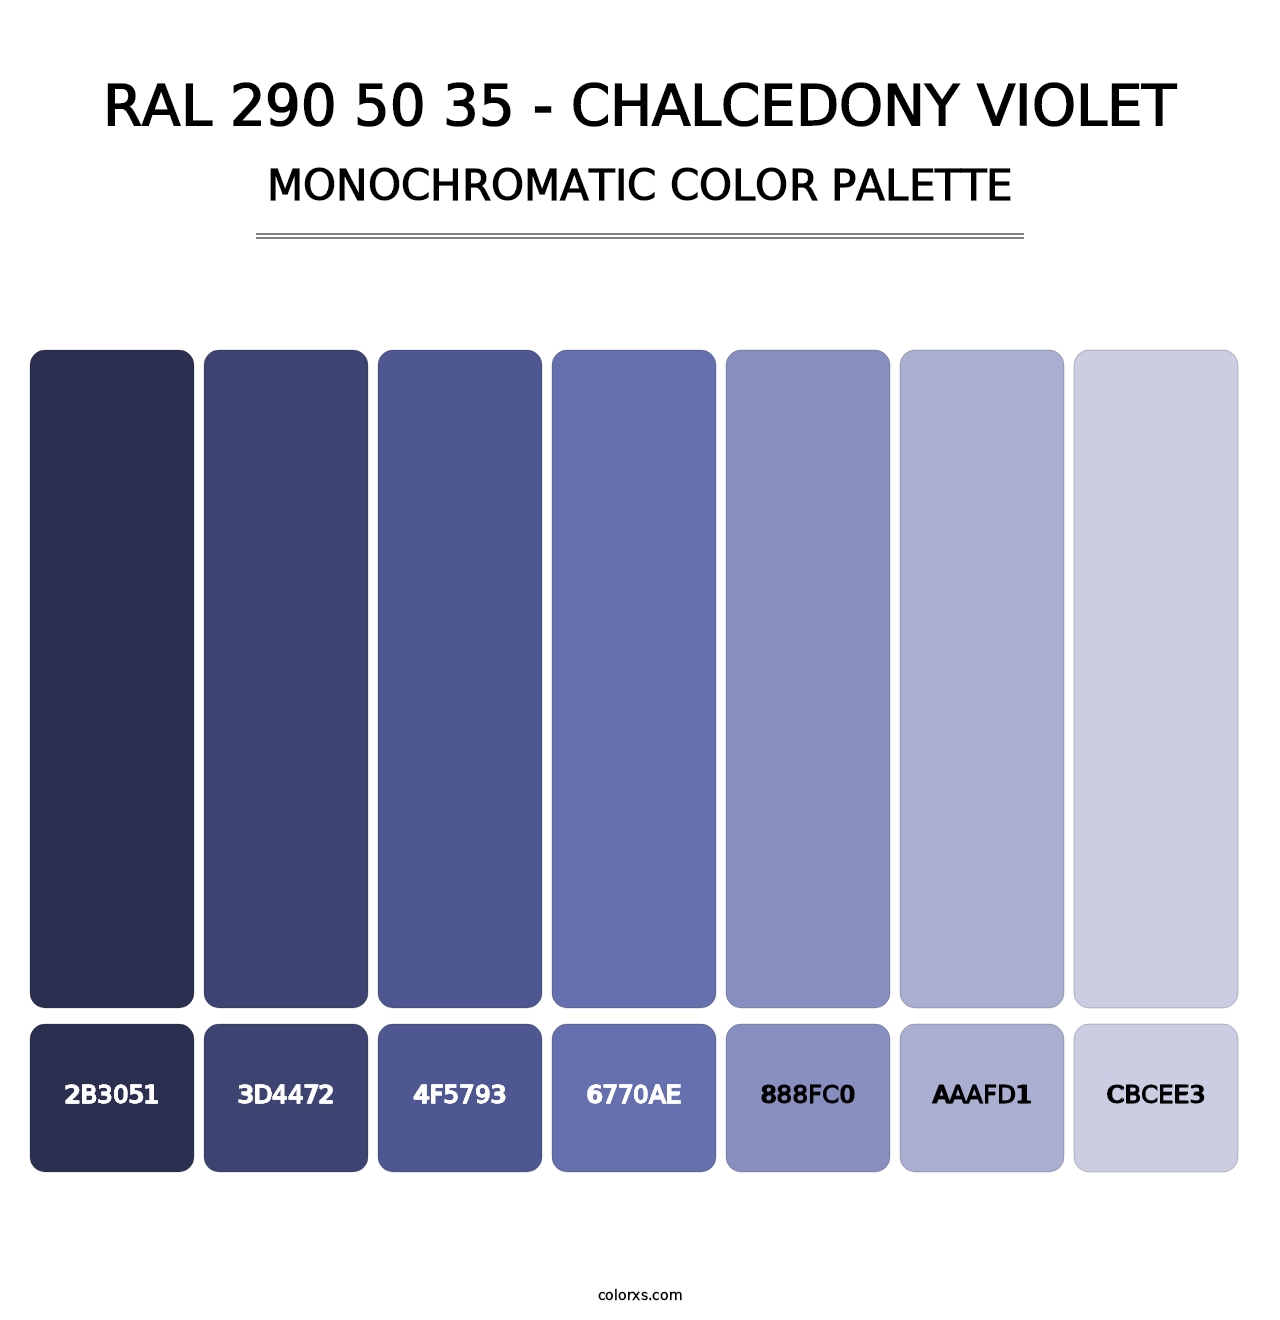 RAL 290 50 35 - Chalcedony Violet - Monochromatic Color Palette